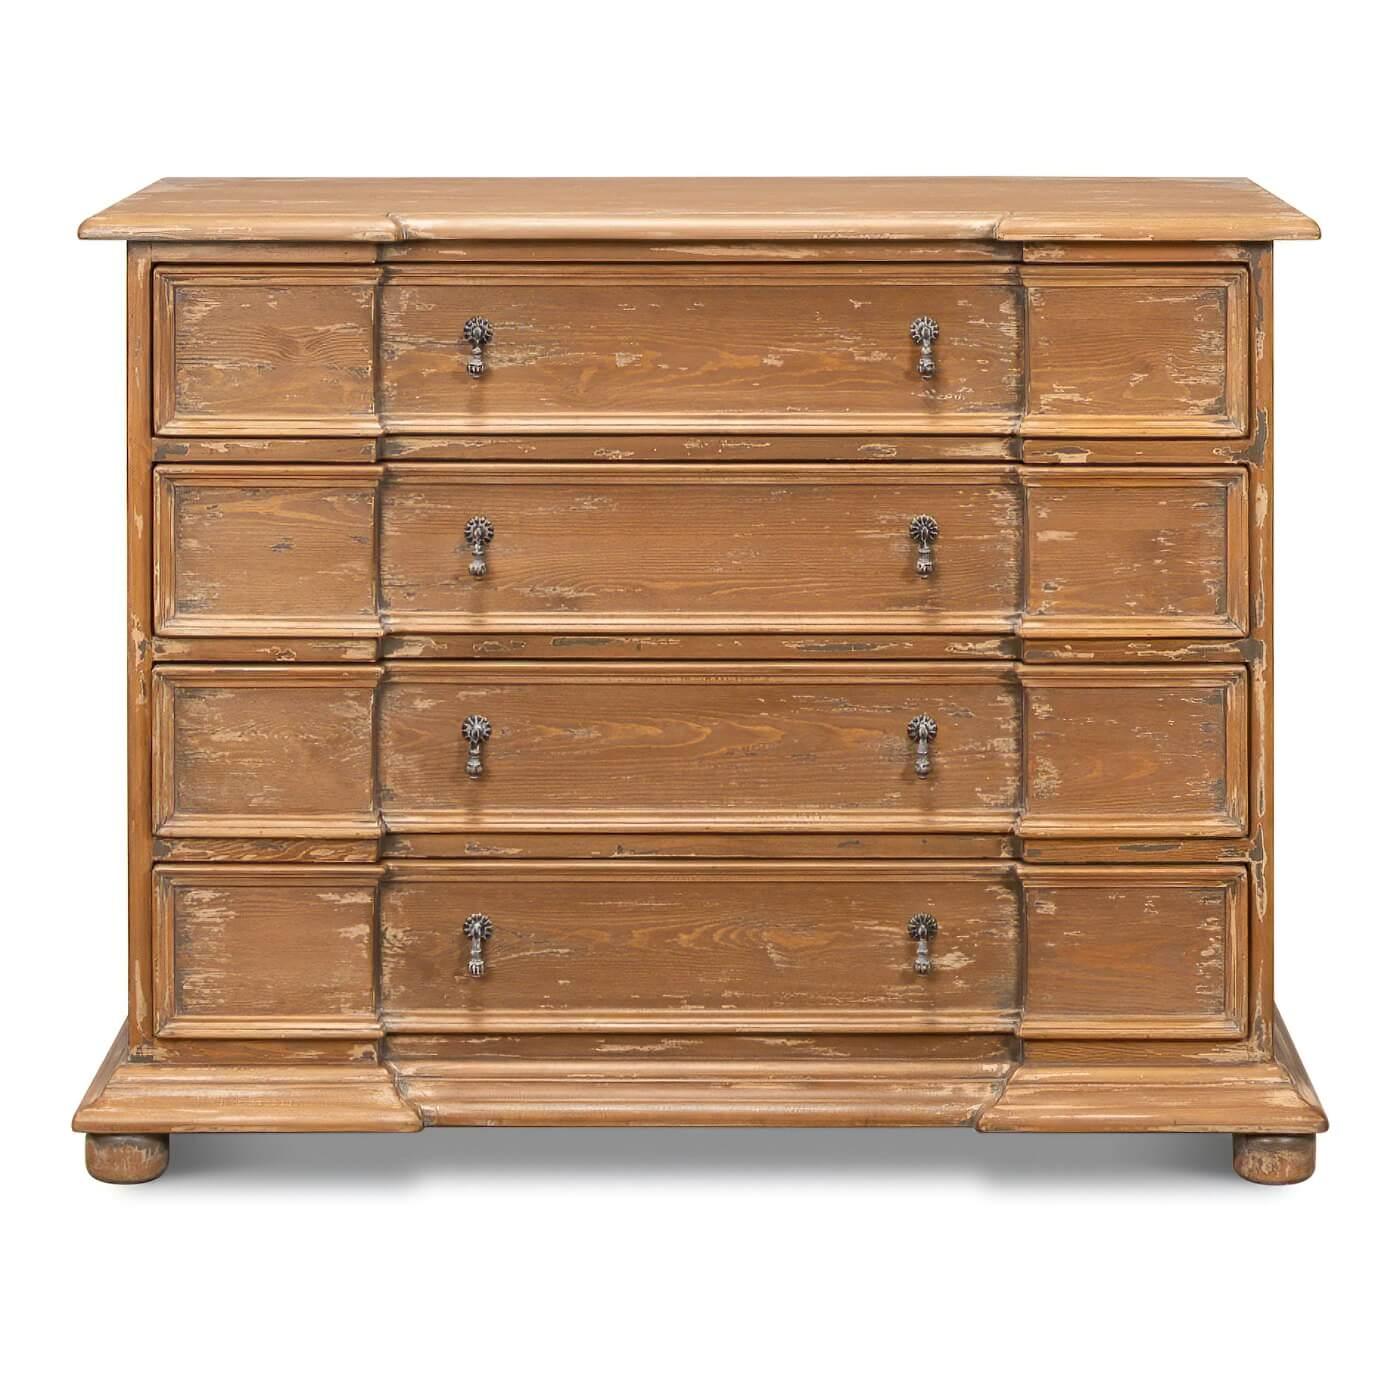 A reclaimed pine commode constructed with tongue and groove joinery. This beautifully crafted piece has a natural aged pine finish with slight white accents. With four serpentine drawers and a natural aged pine interior. 

Dimensions: 47